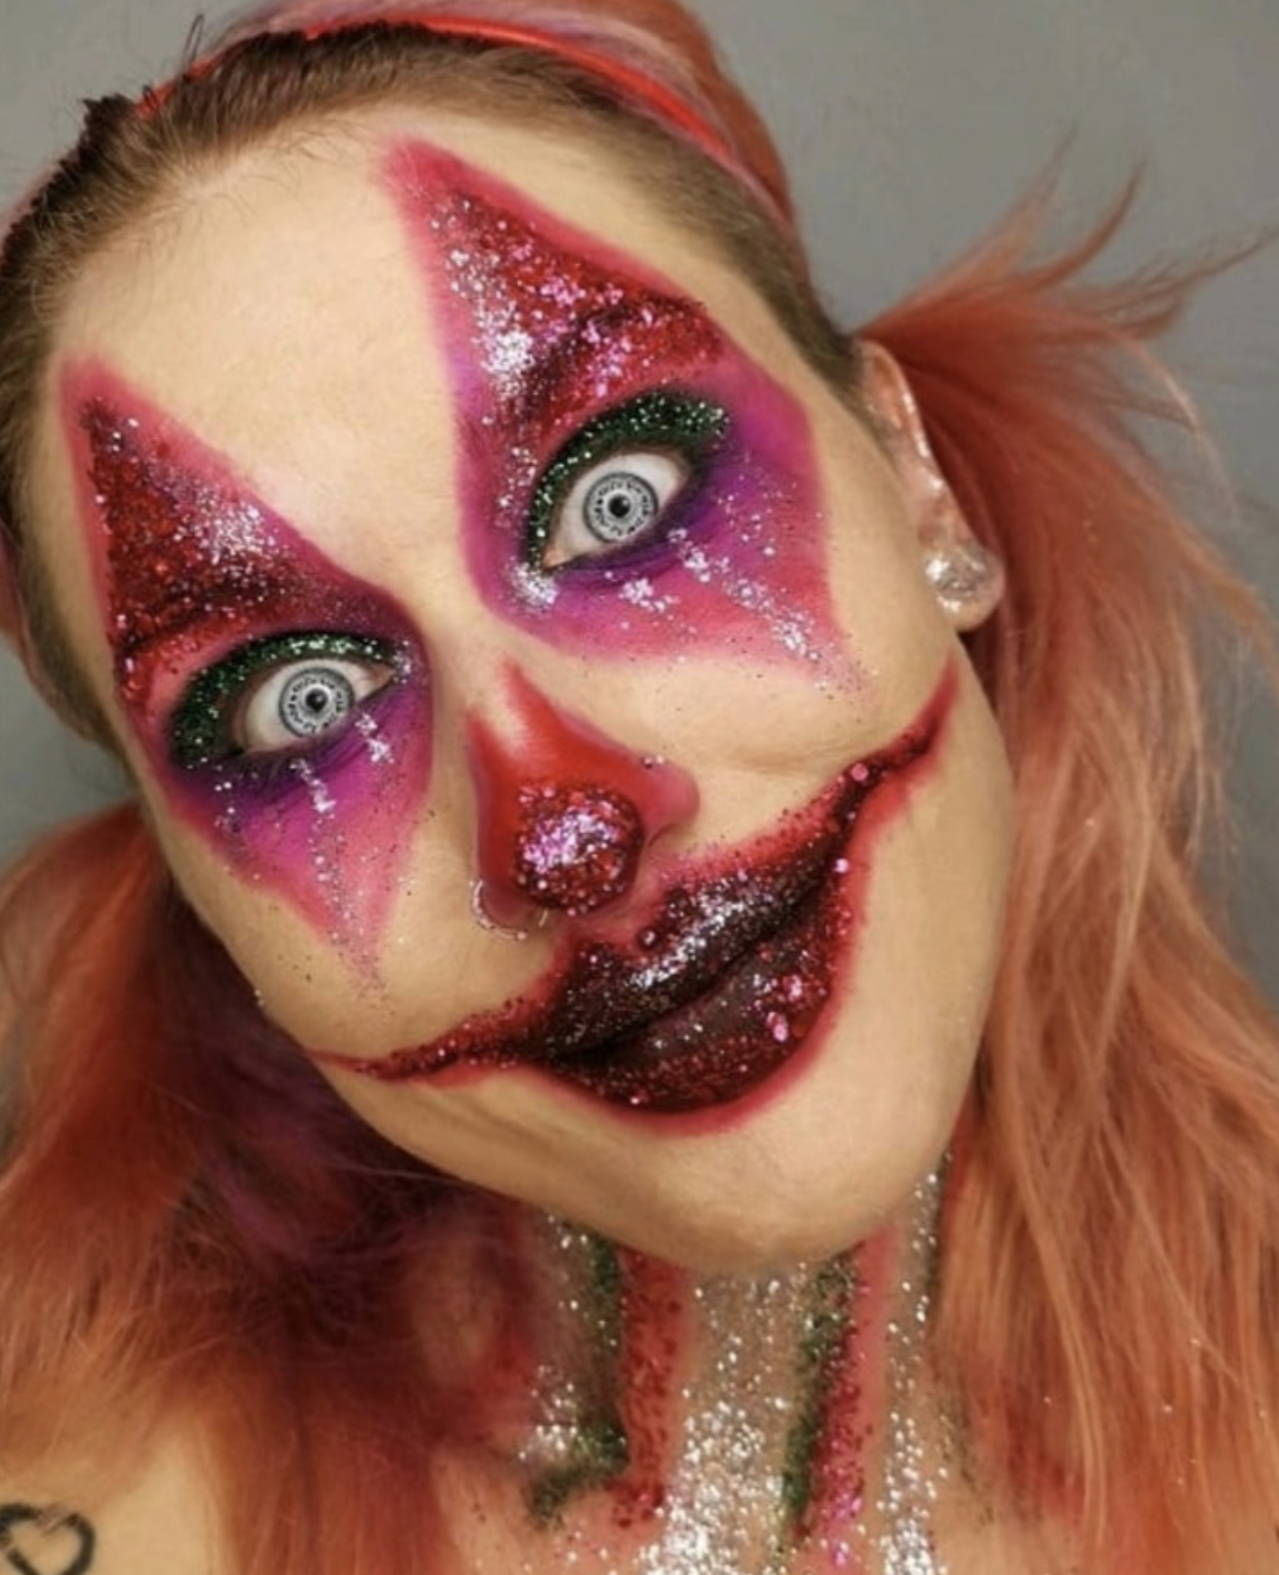 A scary clown halloween makeup look with wide eyes and glitter covering the face